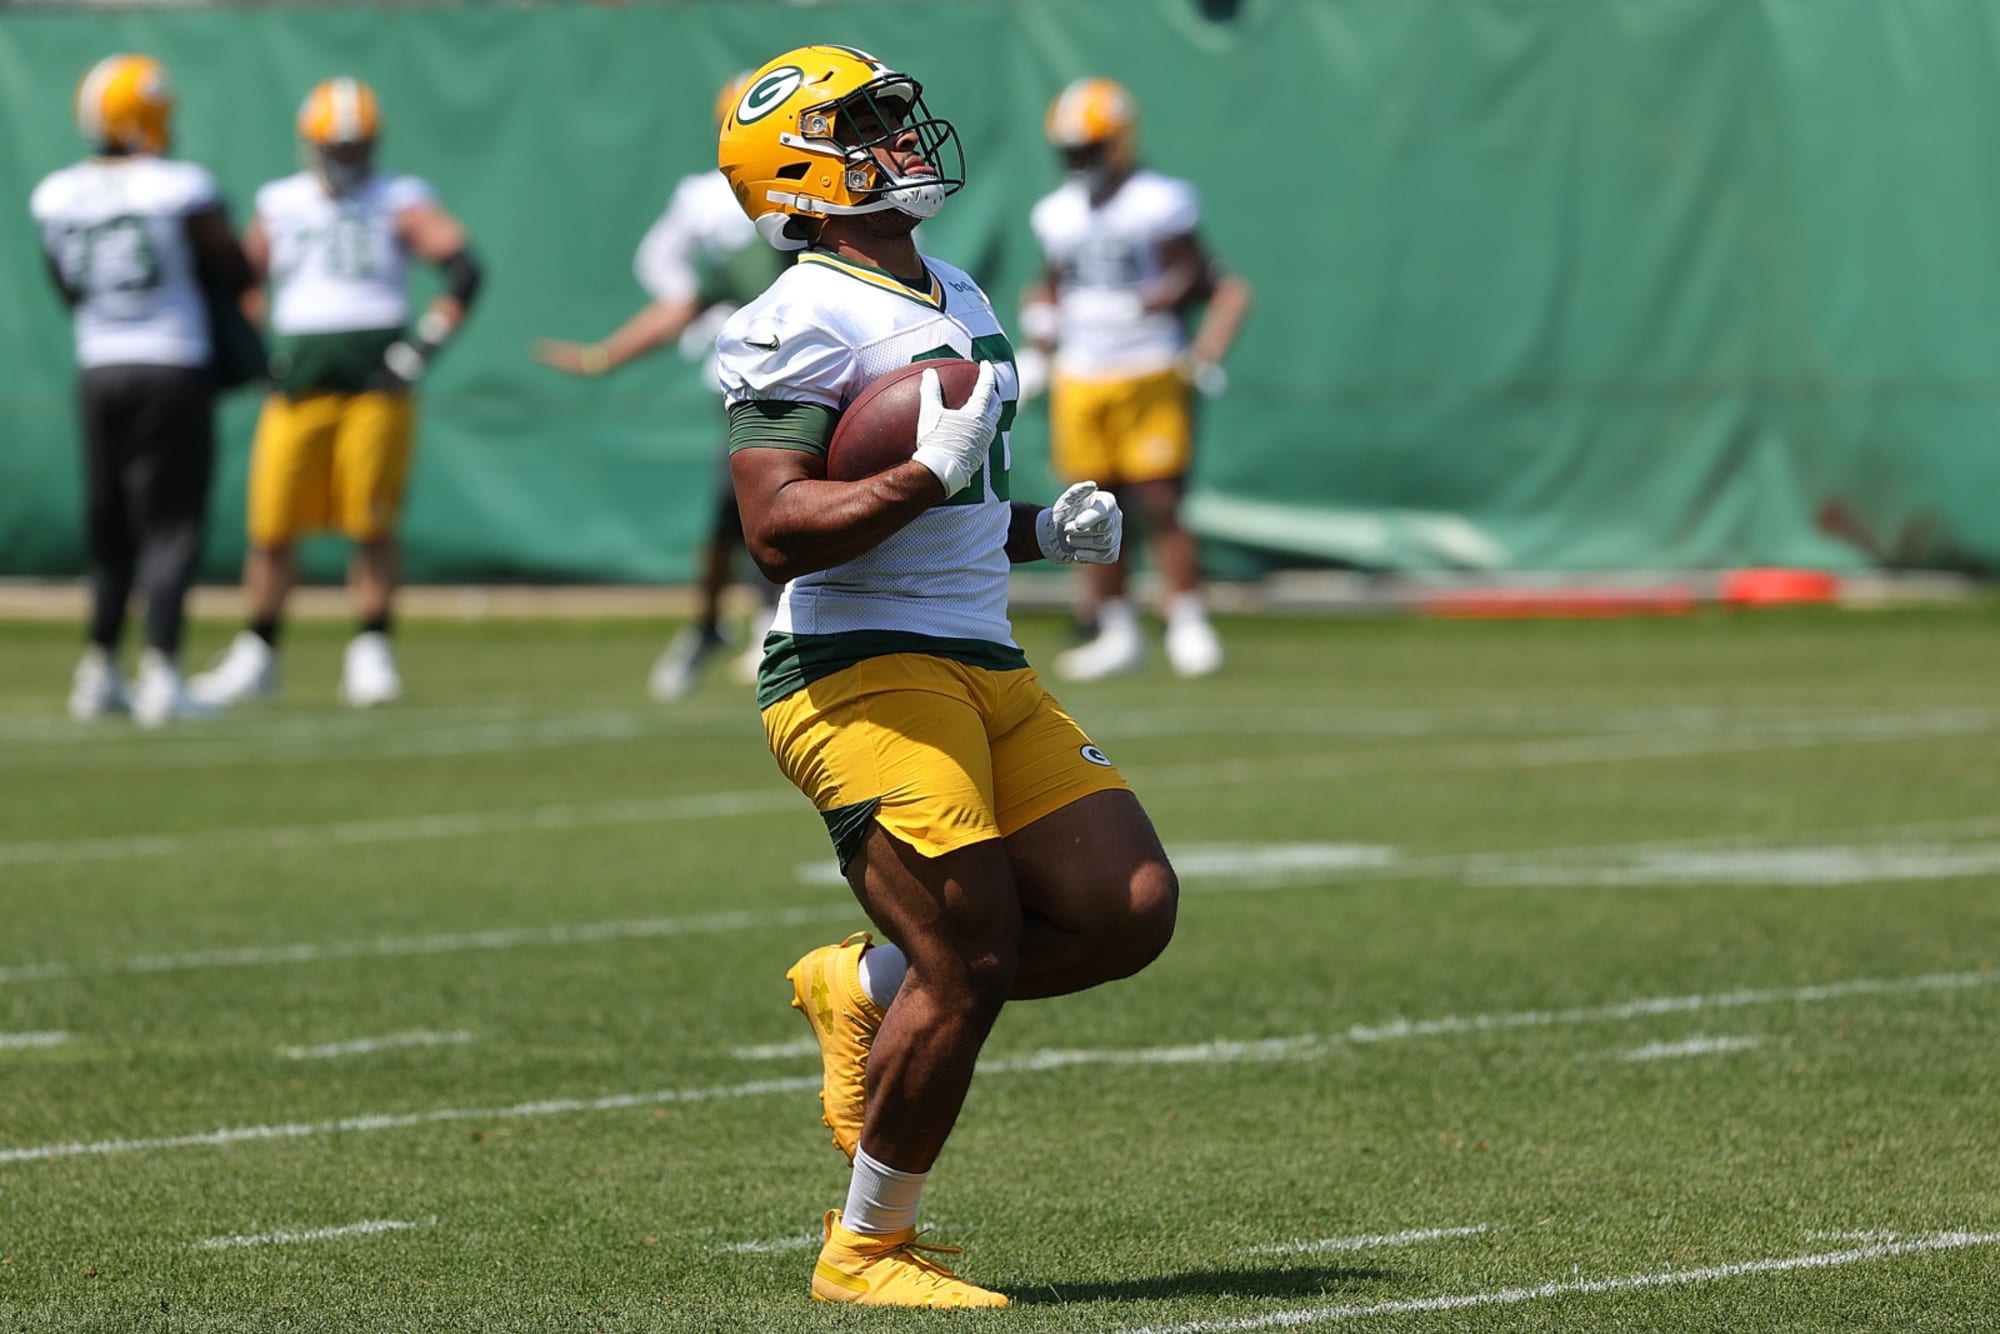 Photo of Packers minicamp photos prove A.J. Dillon stole the ‘Quad King’ title from Saquon Barkley